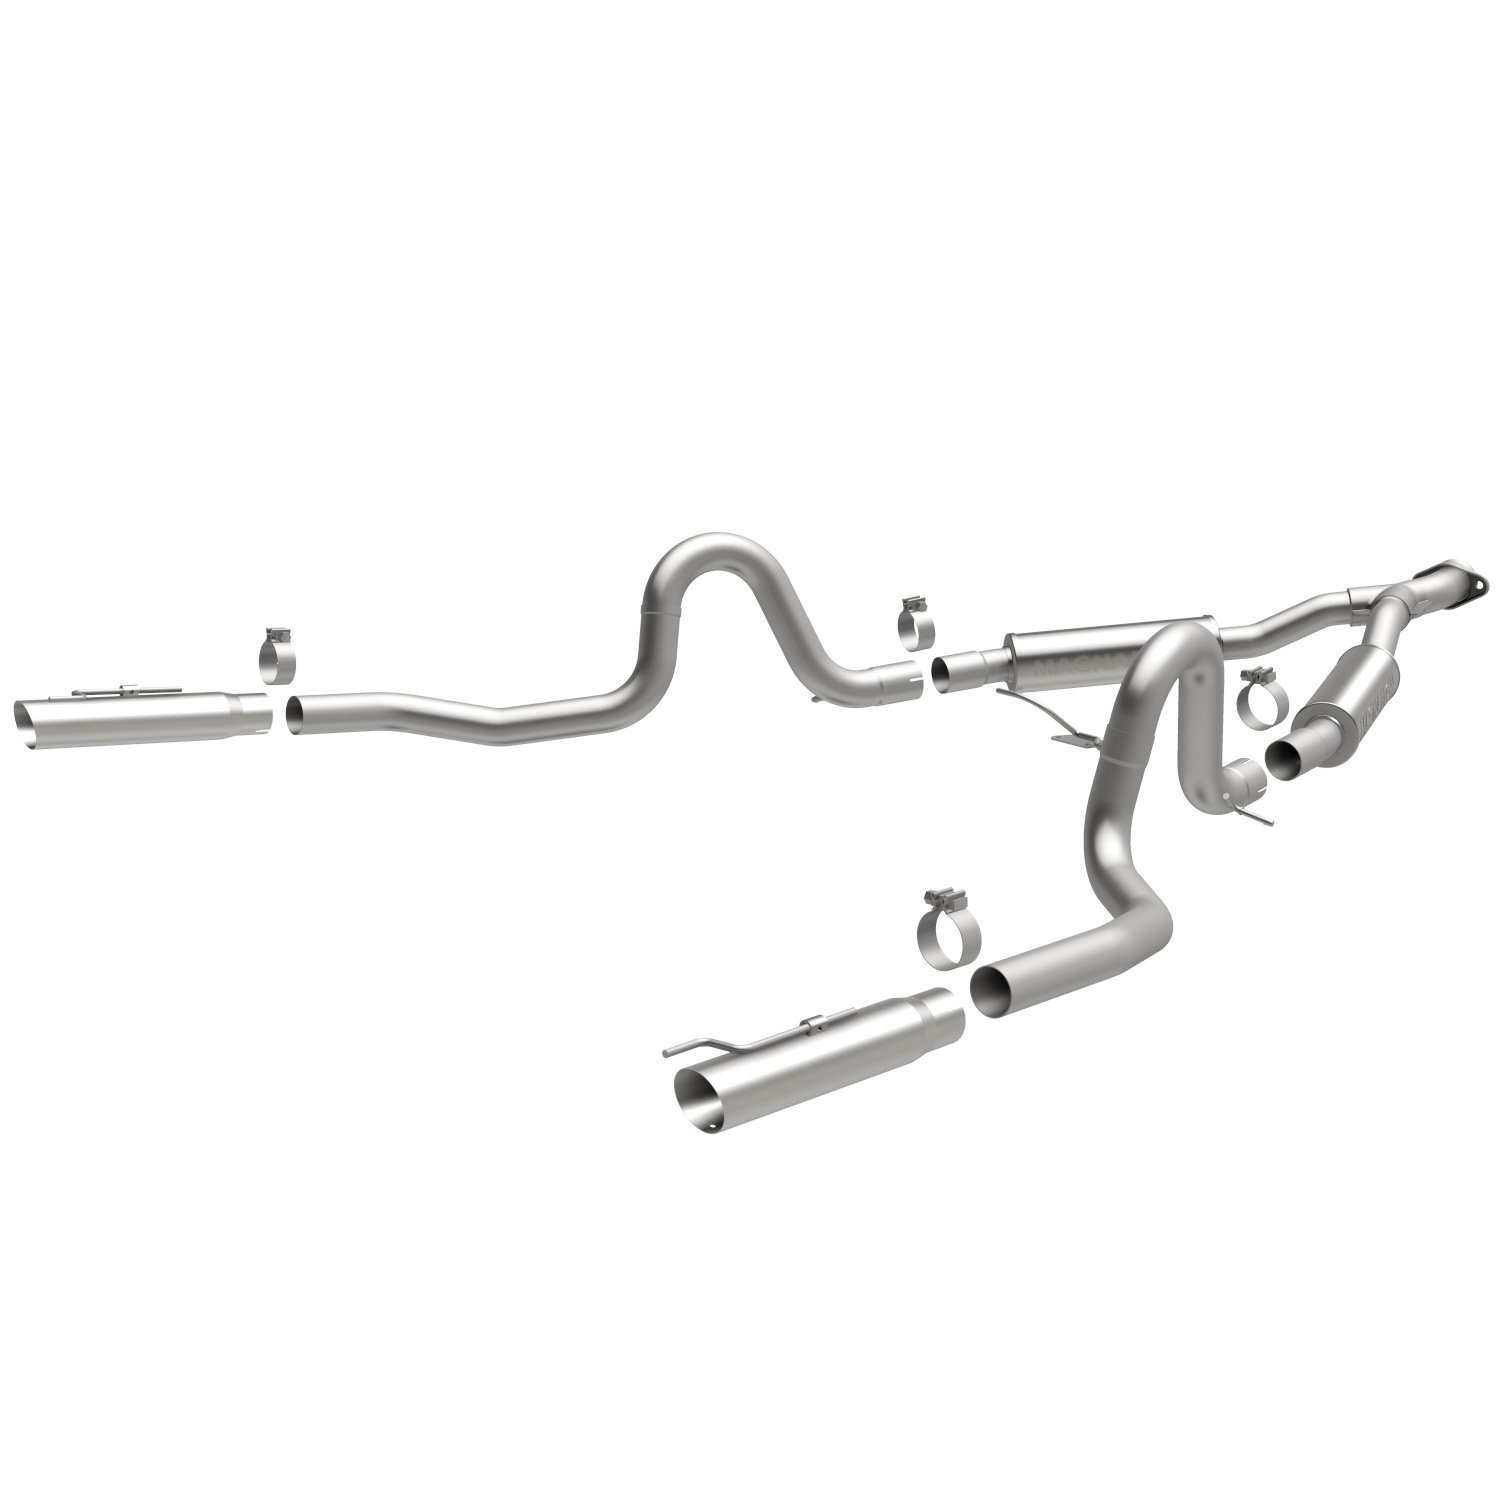 Street Series Cat-Back Exhaust System 1999-2004 Mustang 3.8L V6